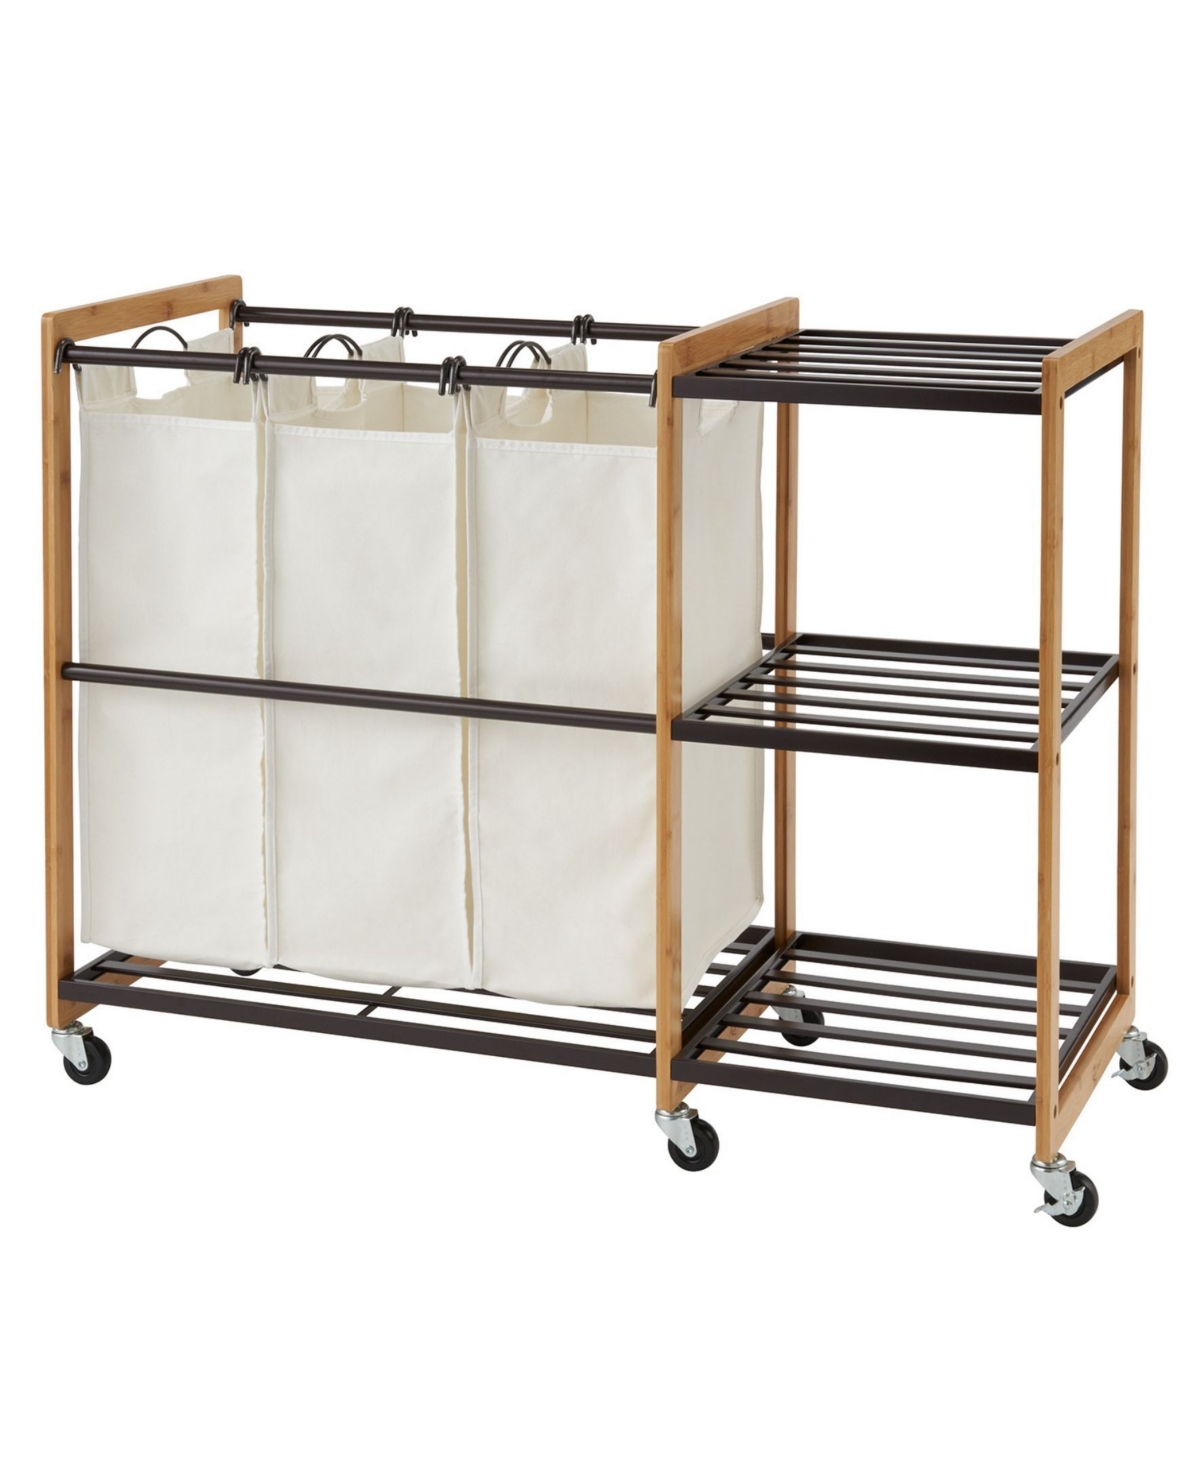 3 Bag Laundry Station with Wheels - Bronze